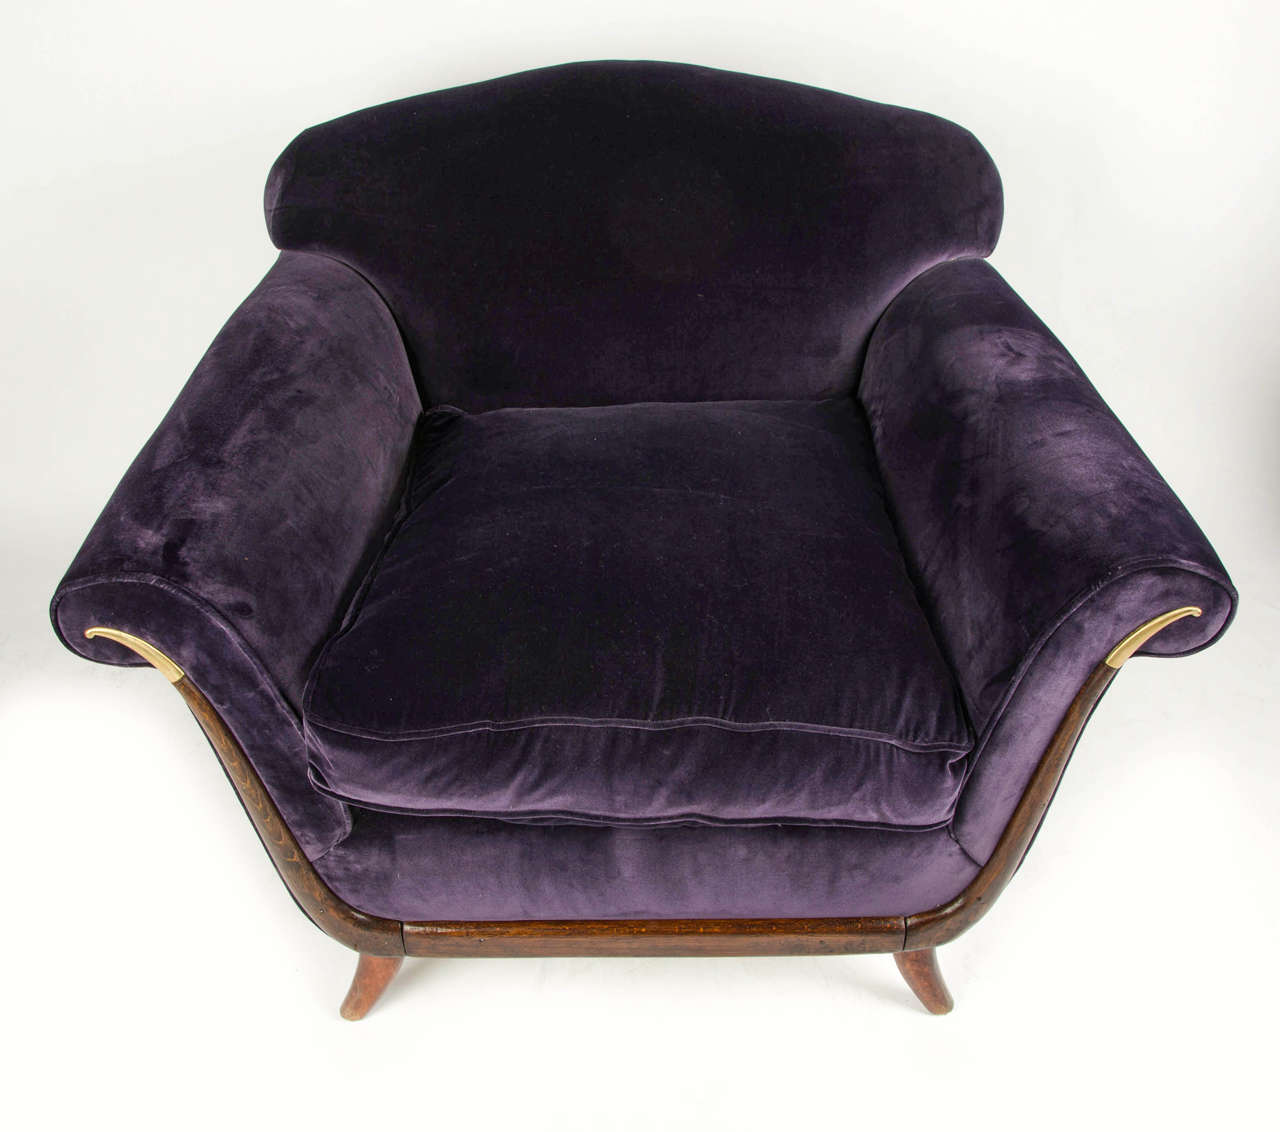 A pair of Neo-Regency armchairs with decorative wooden frame and brass endings, in the style of G.Ulrich c.1940's